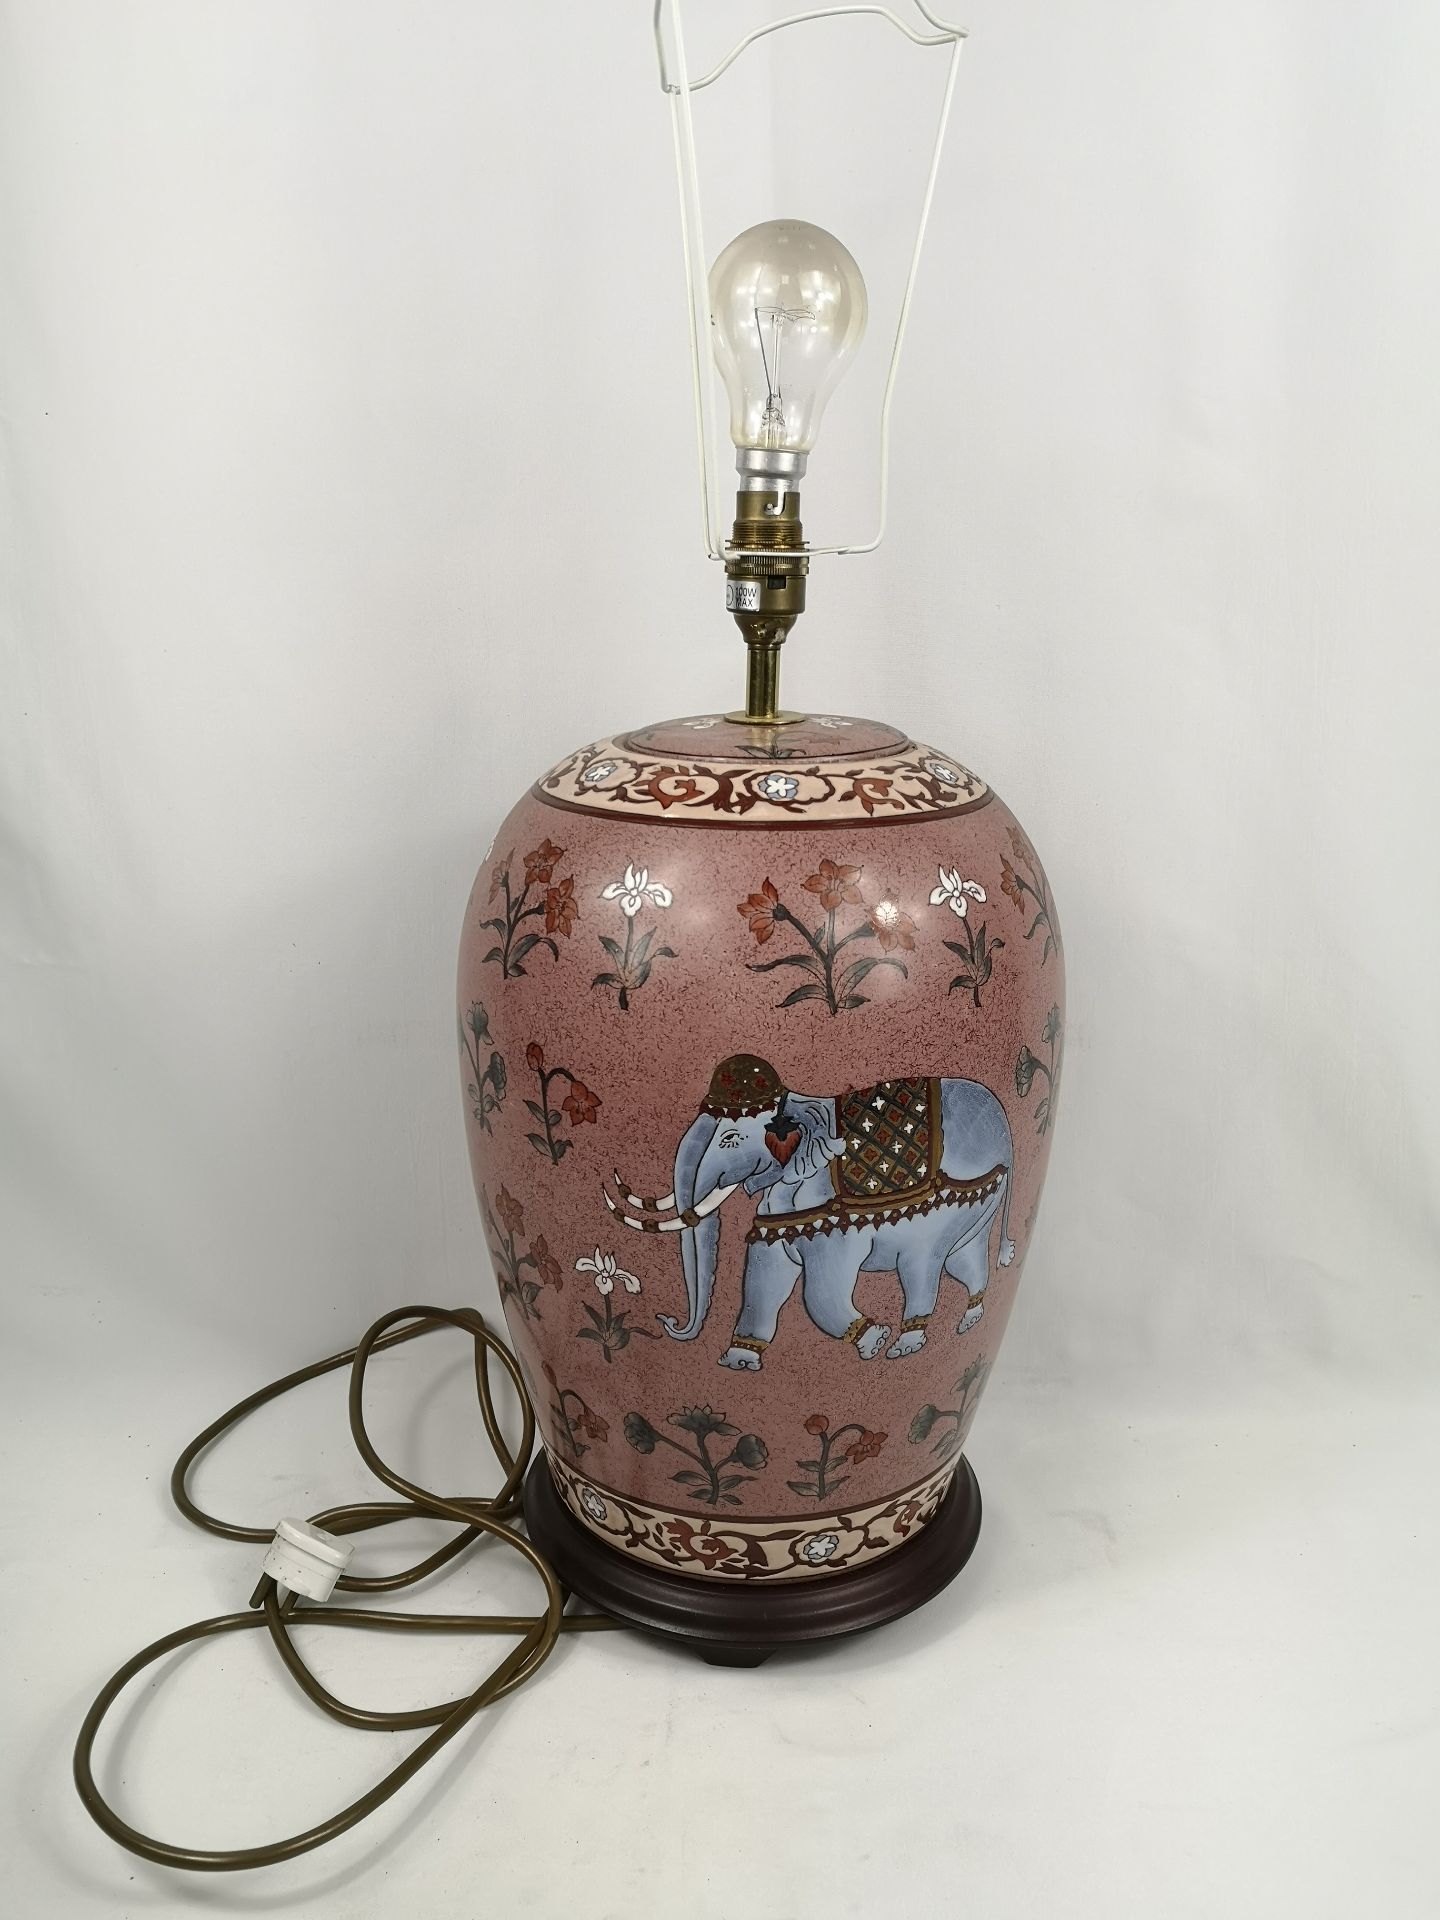 Contemporary Oriental style table lamp - Image 2 of 4